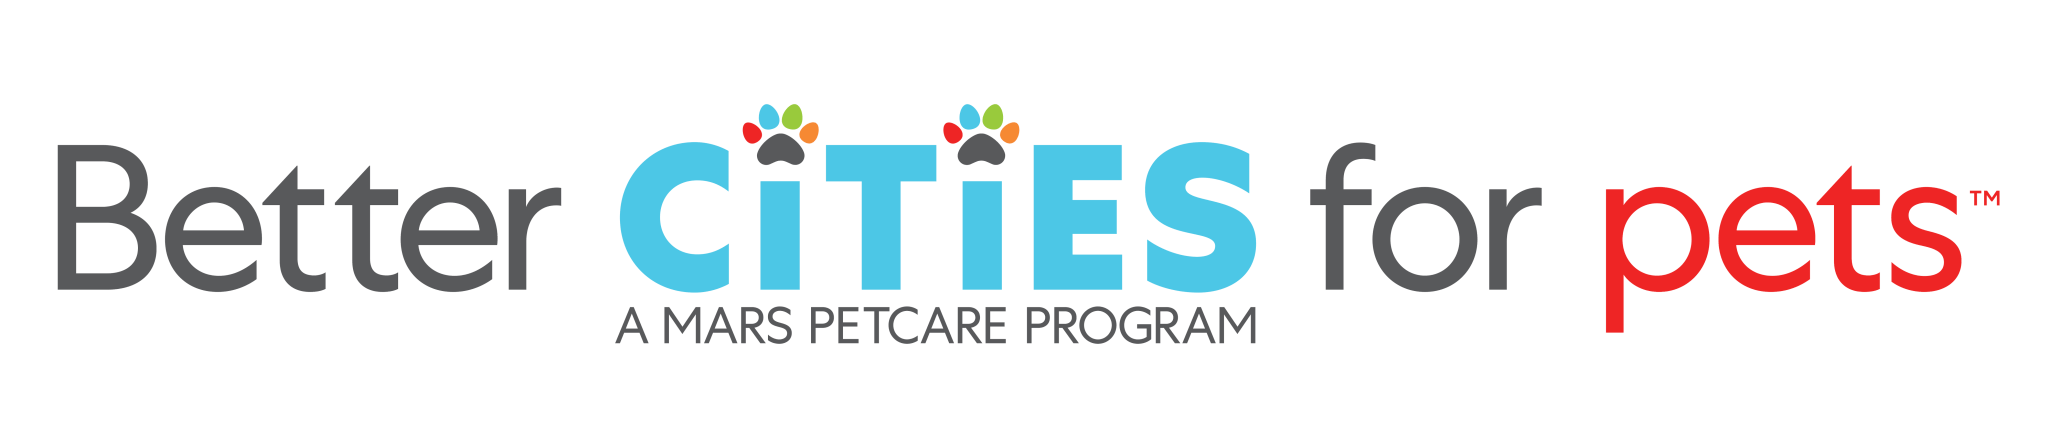 Better Cities for Pets logo